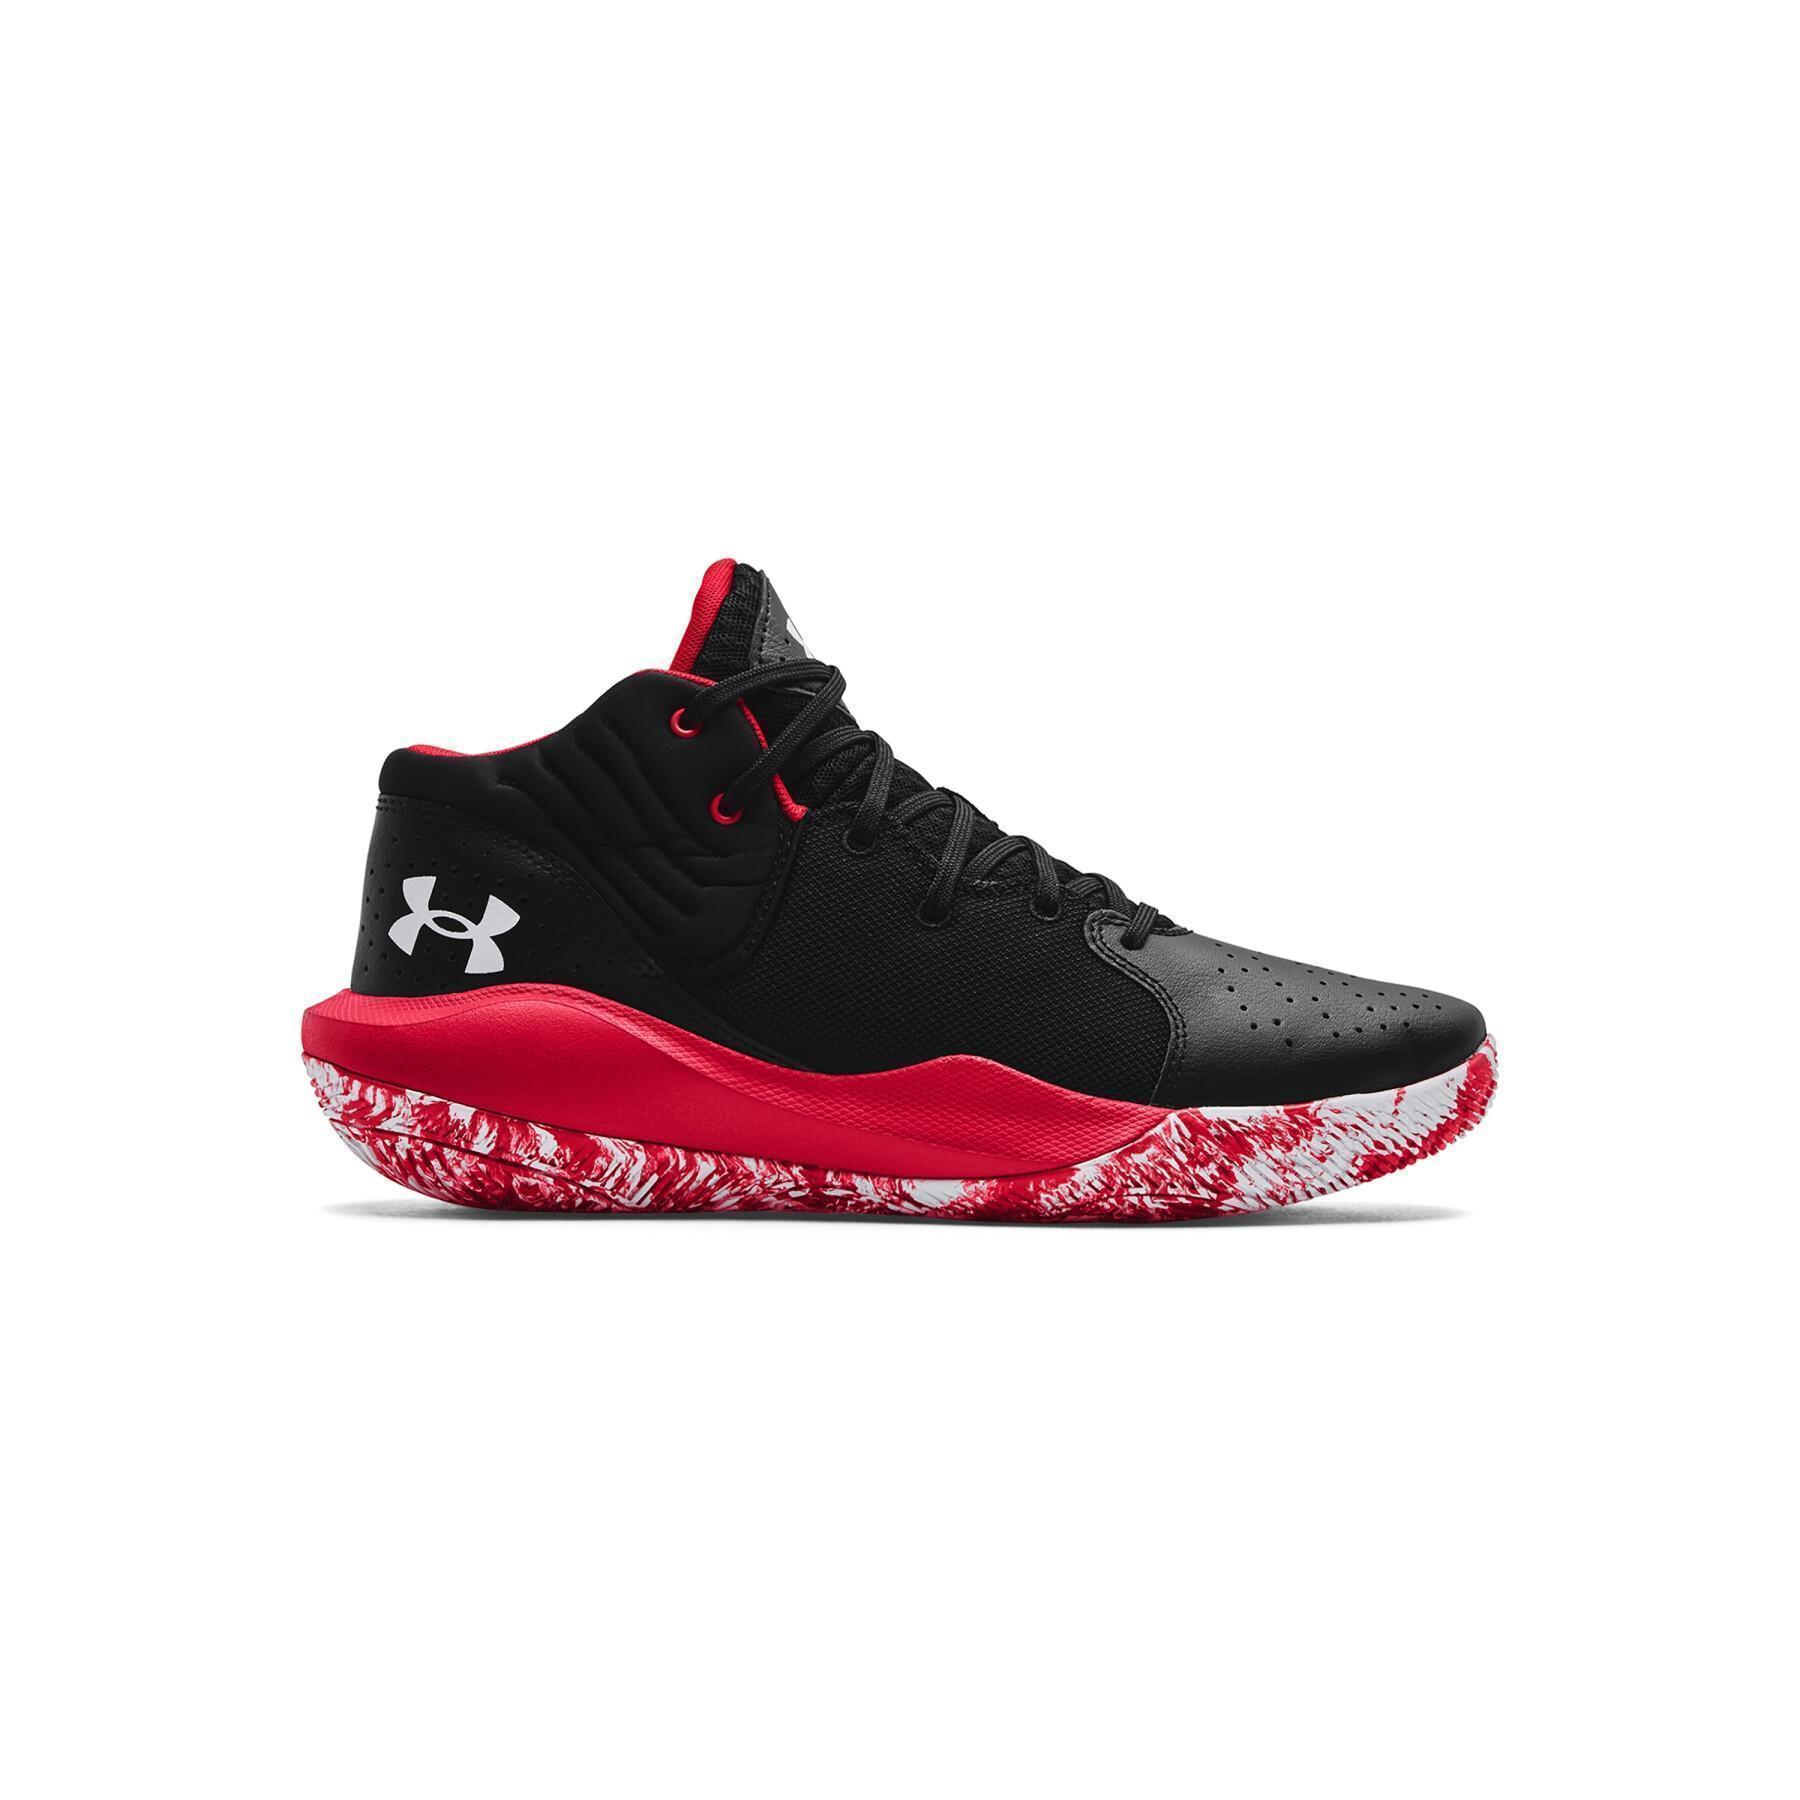 Indoor shoes Under Armour '21 - Under Armour Other Brands - Shoes